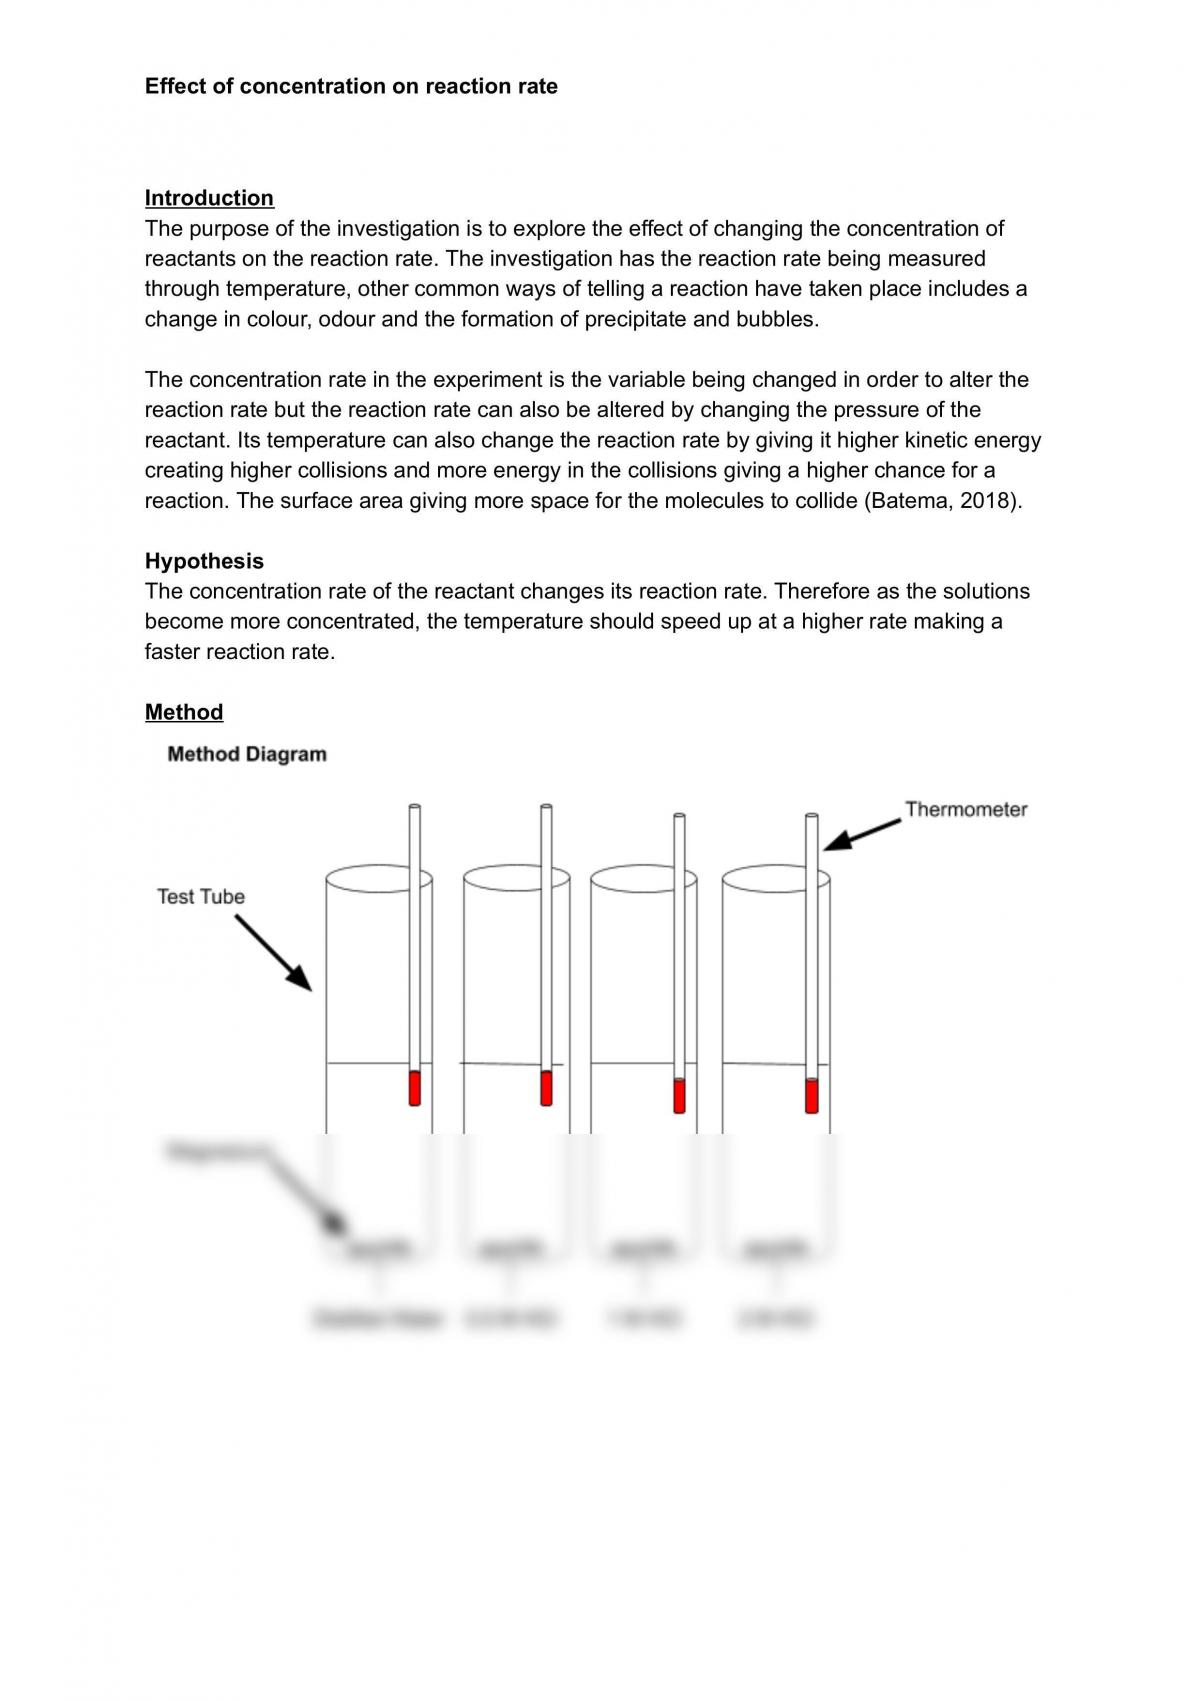 Effect of Concentration on Reaction Rate - Page 1